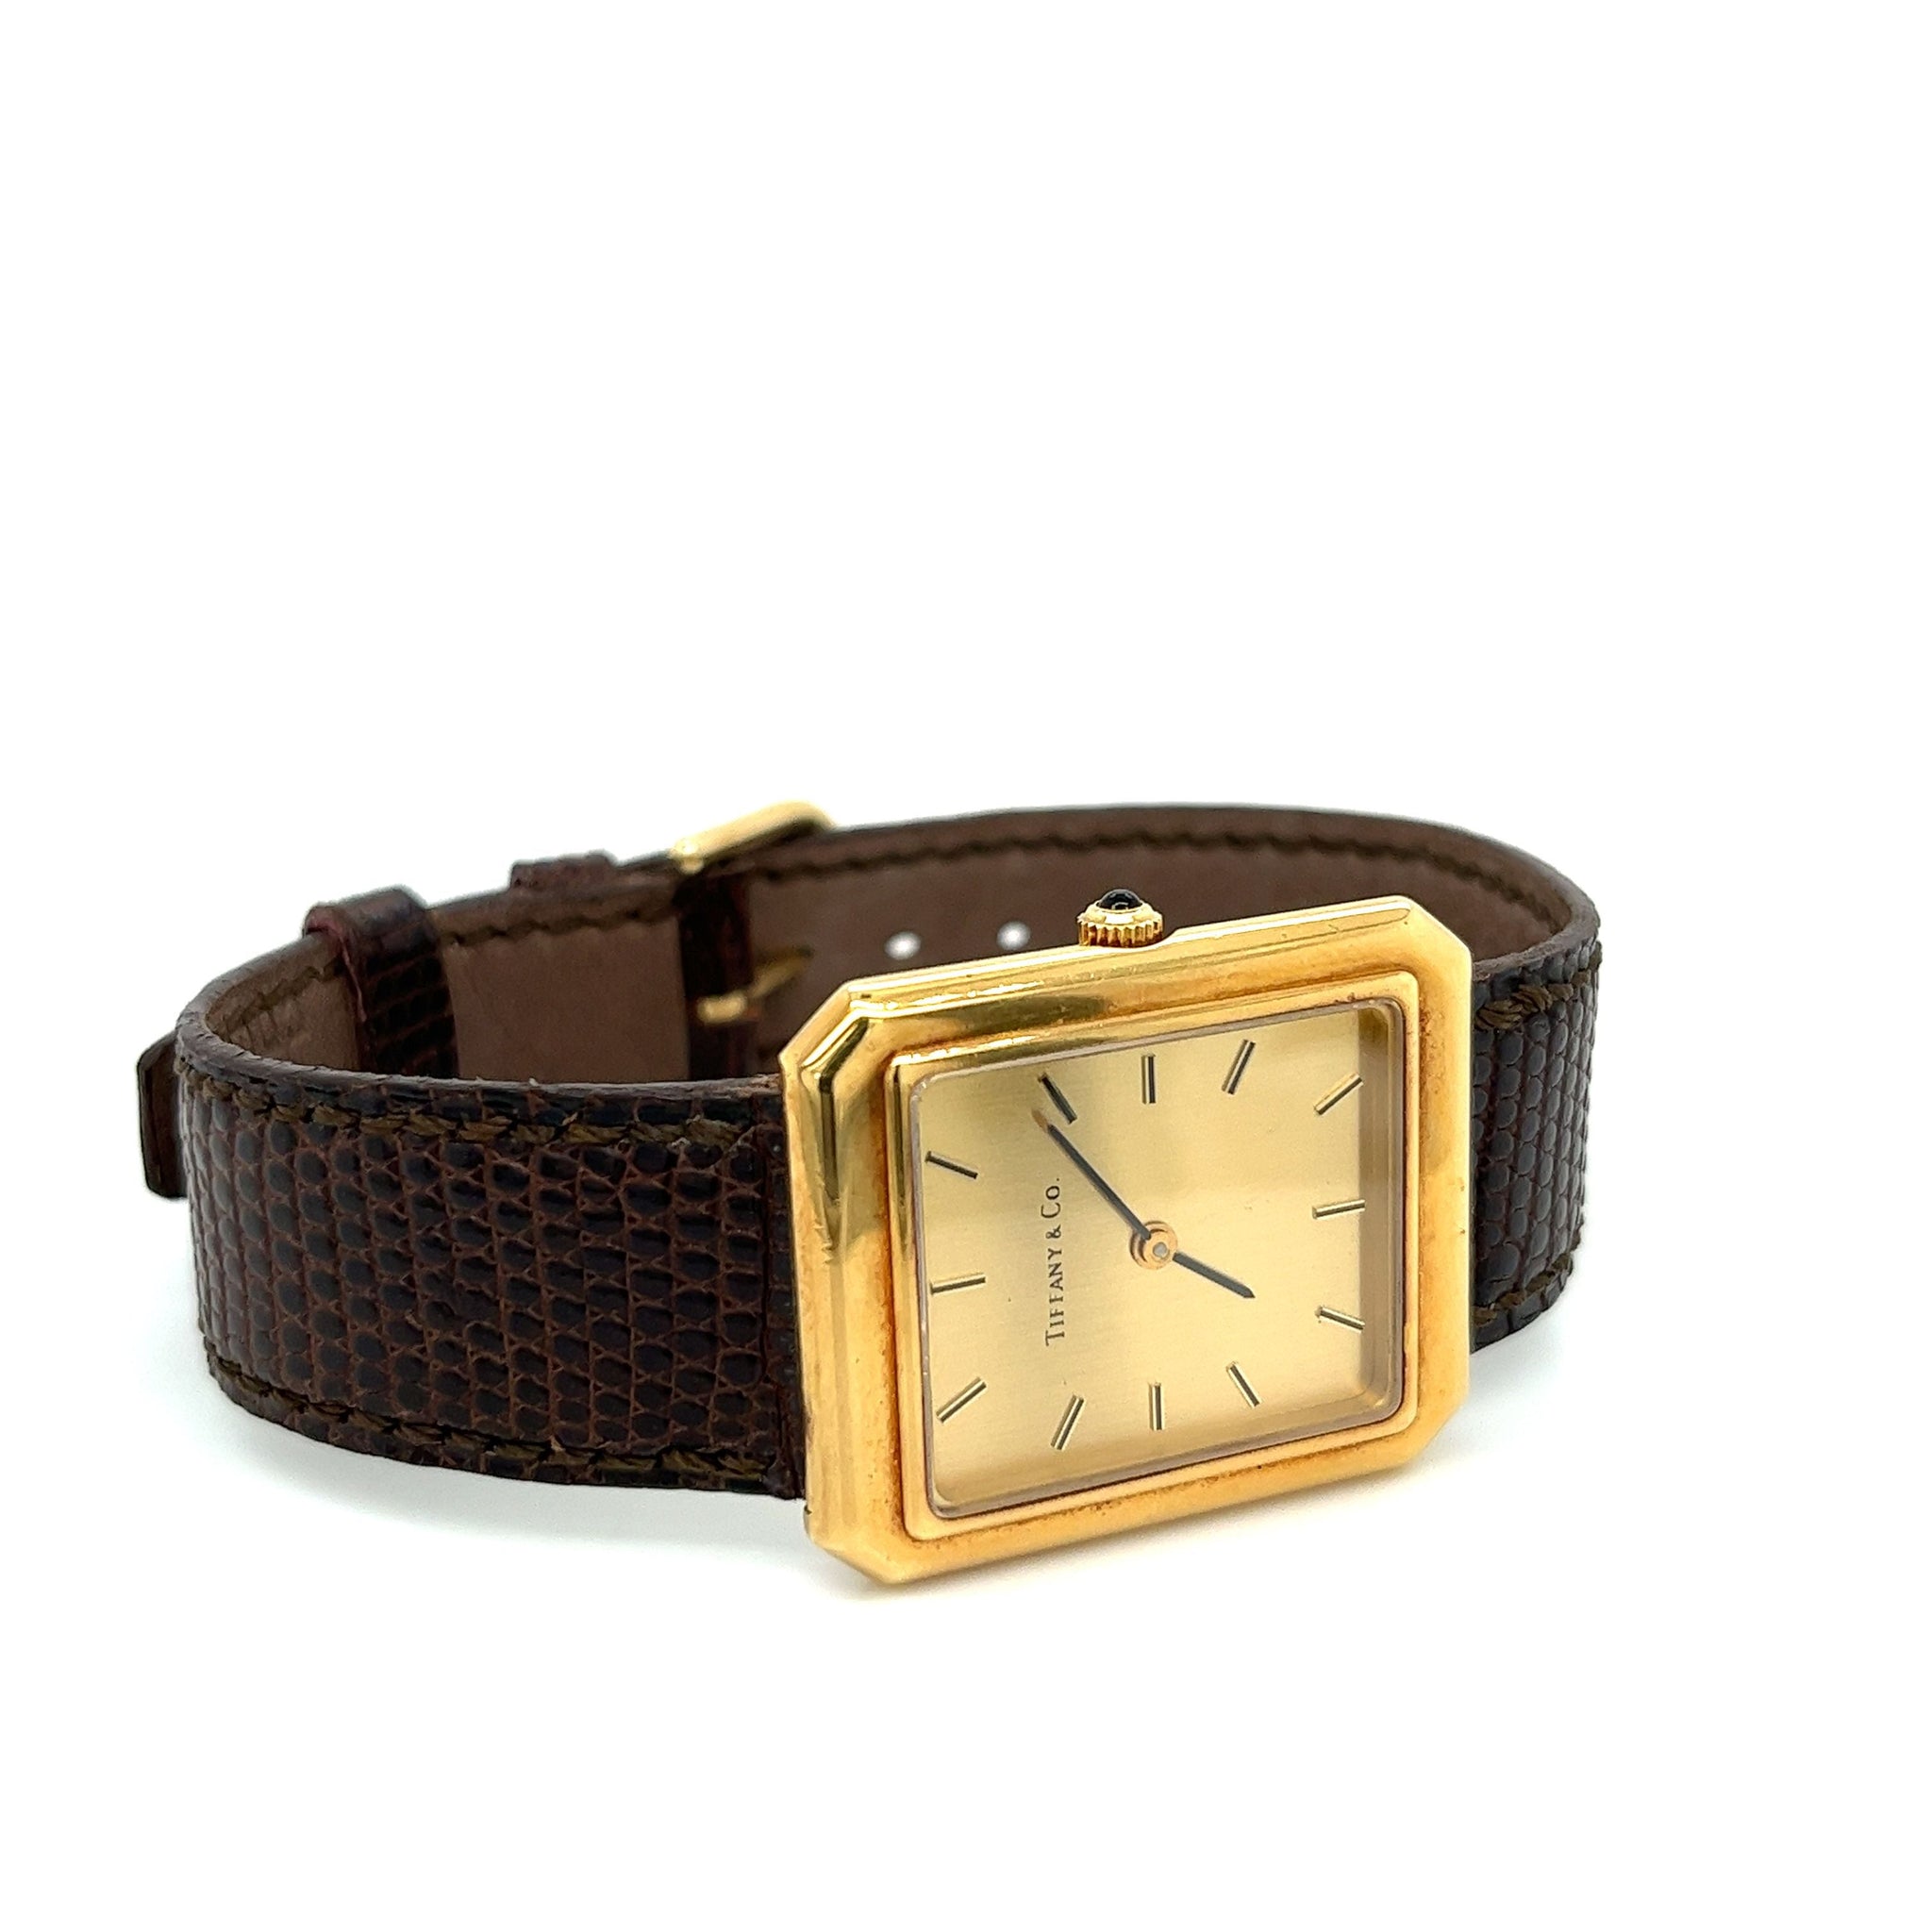 Unisex Tiffany & Co. Rectangular 18k Gold Watch with Leather Strap